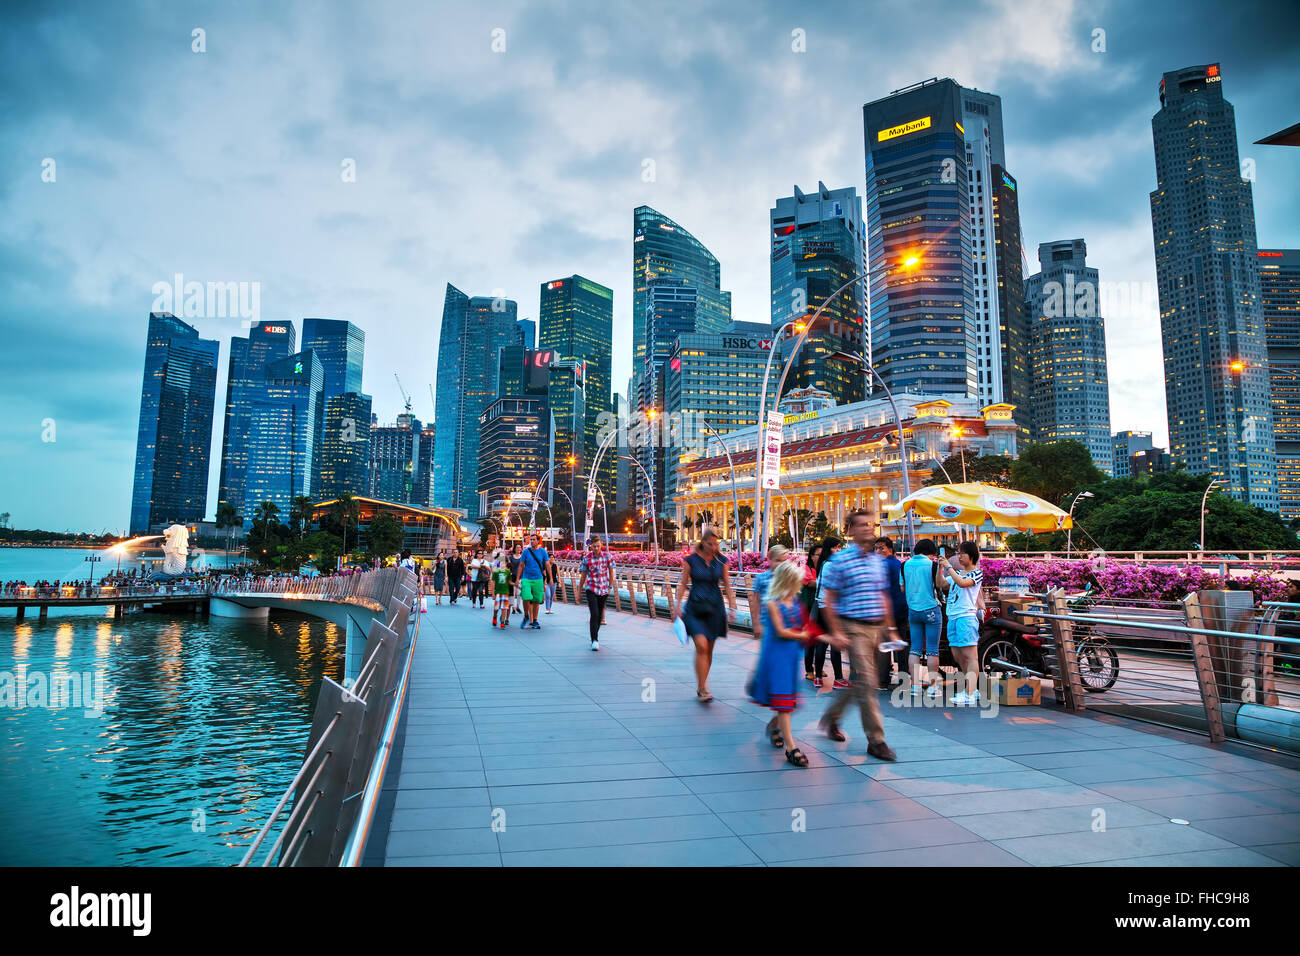 SINGAPORE - OCTOBER 30: Overview of the marina bay with the Merlion on October 30, 2015 in Singapore. Stock Photo